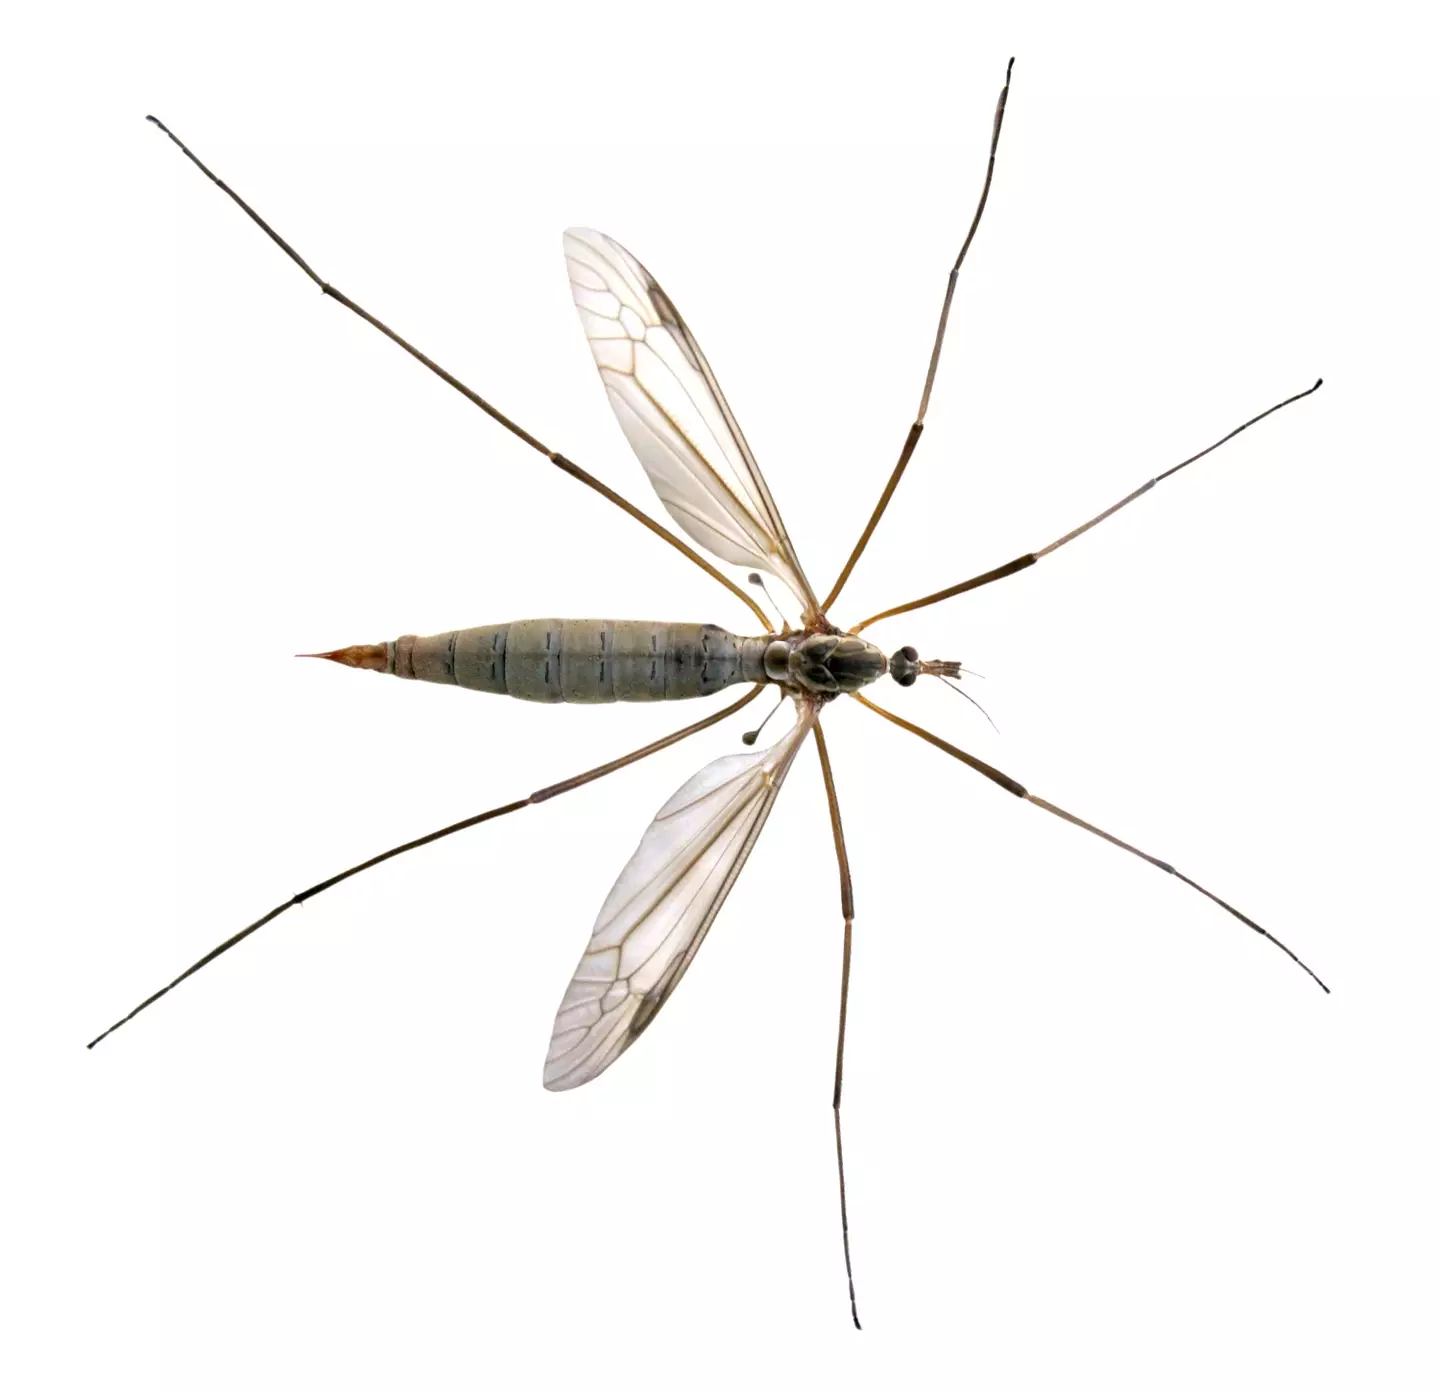 The crane fly is one of the bugs we refer to as a daddy long legs.